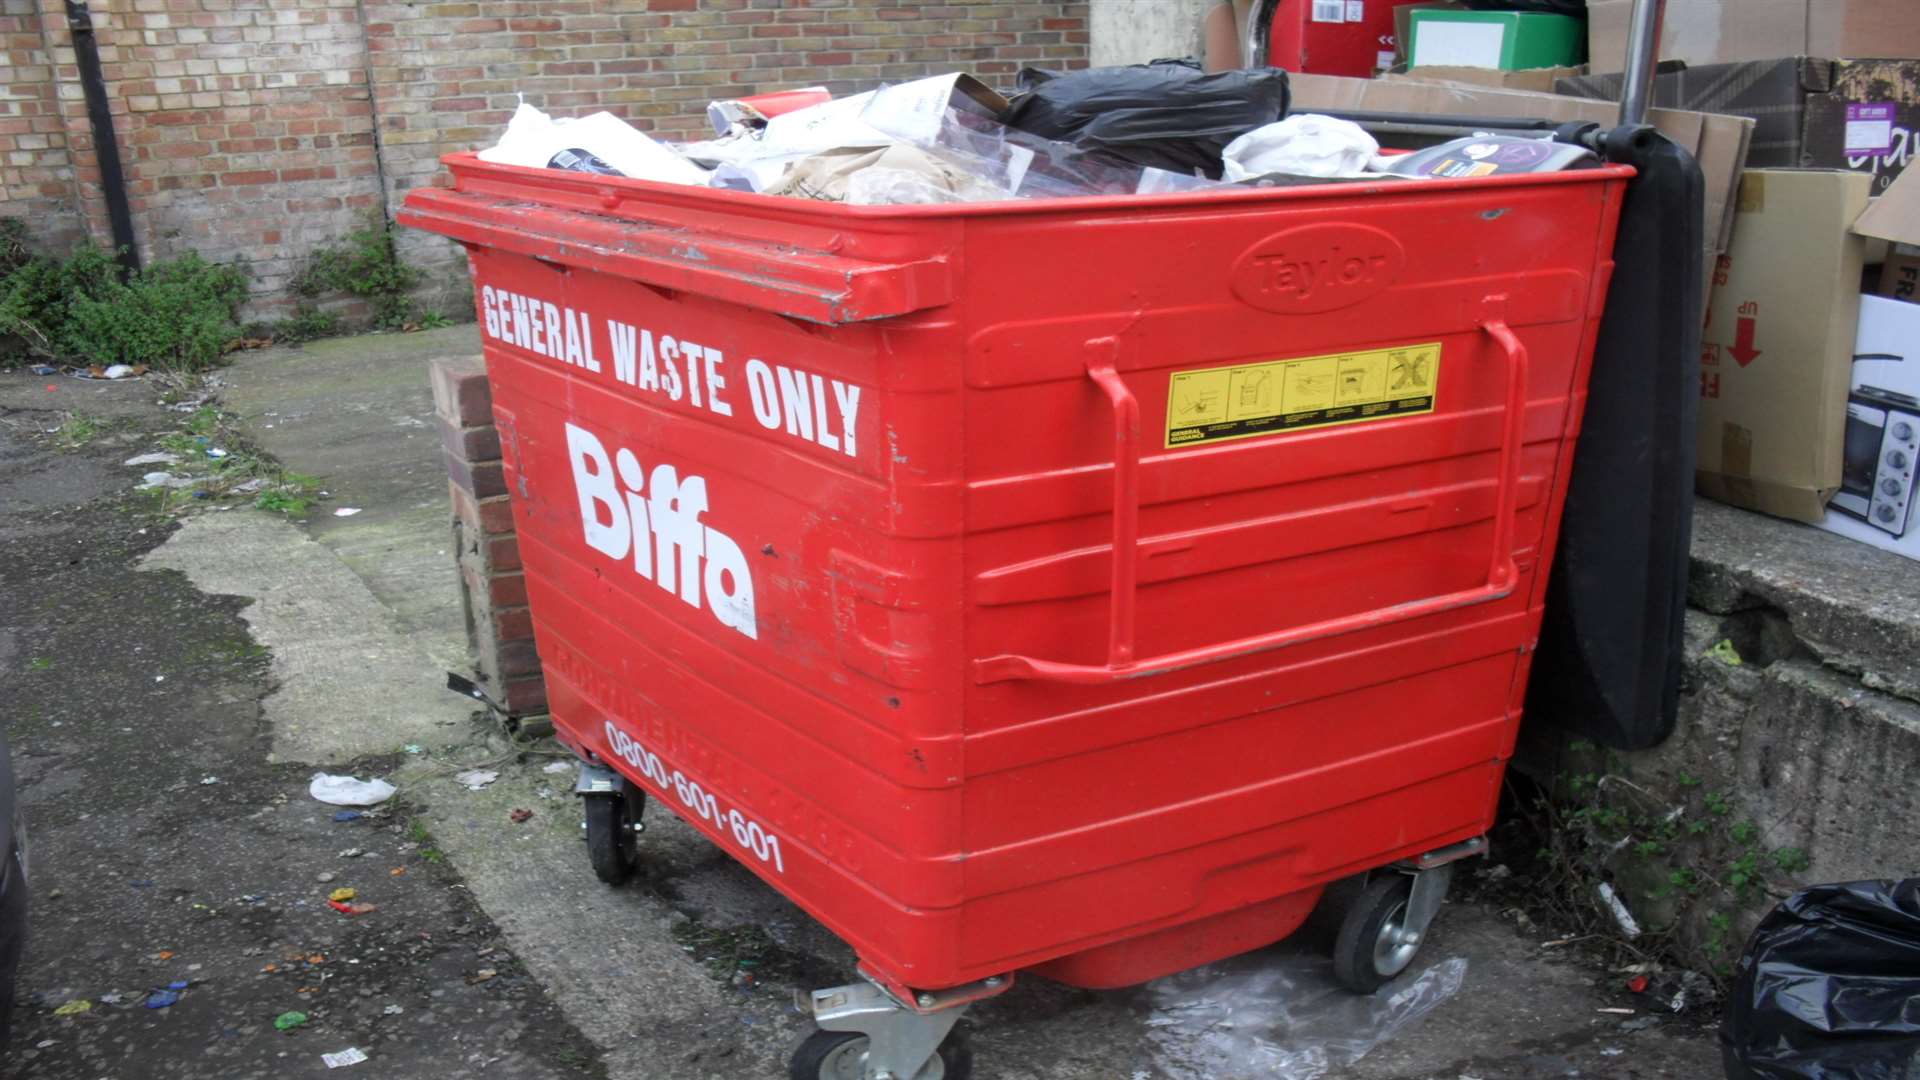 A bin owned by the British Heart Foundation in Gillingham was stolen before being returned full of building waste